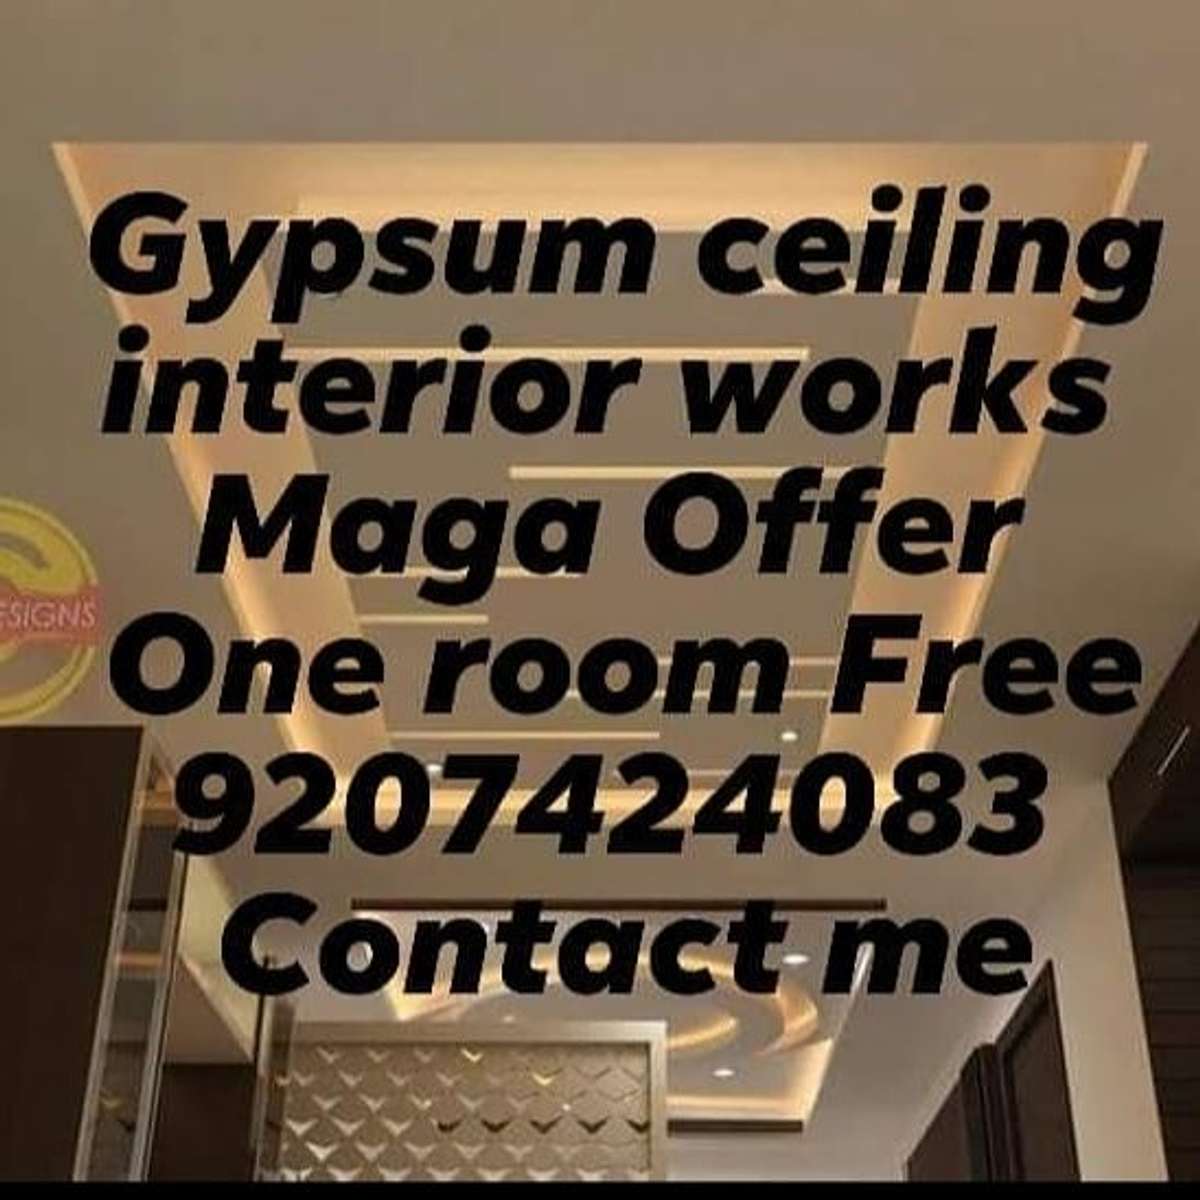 Contact me all